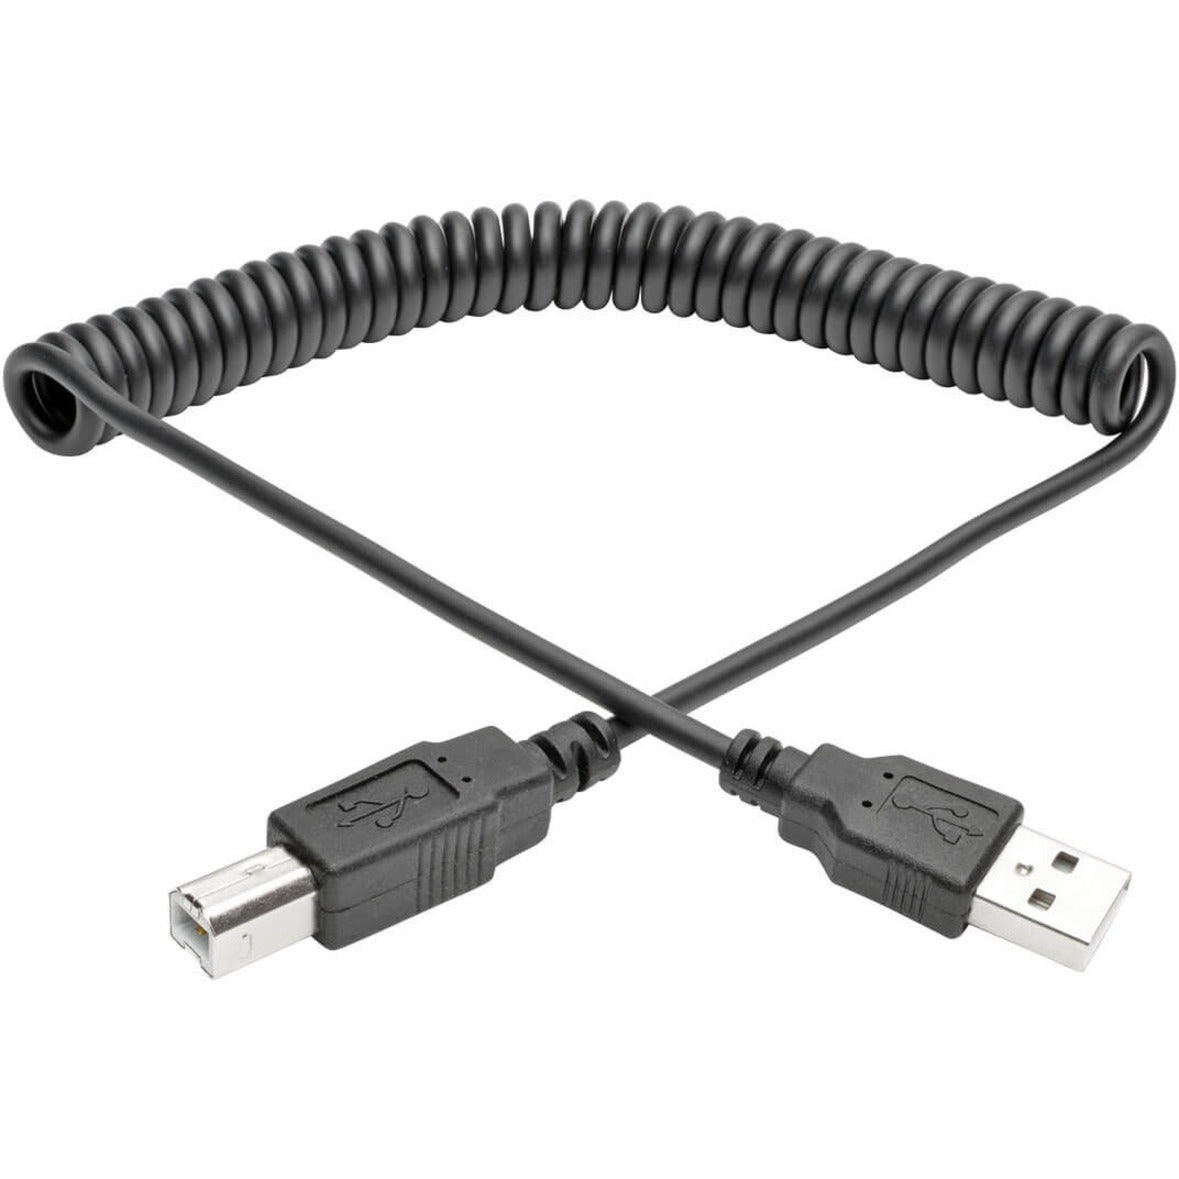 Tripp Lite U022-006-COIL USB 2.0 Hi-Speed A/B Coiled Cable (M/M), 6 ft, Flexible, Rugged, EMI/RF Protection